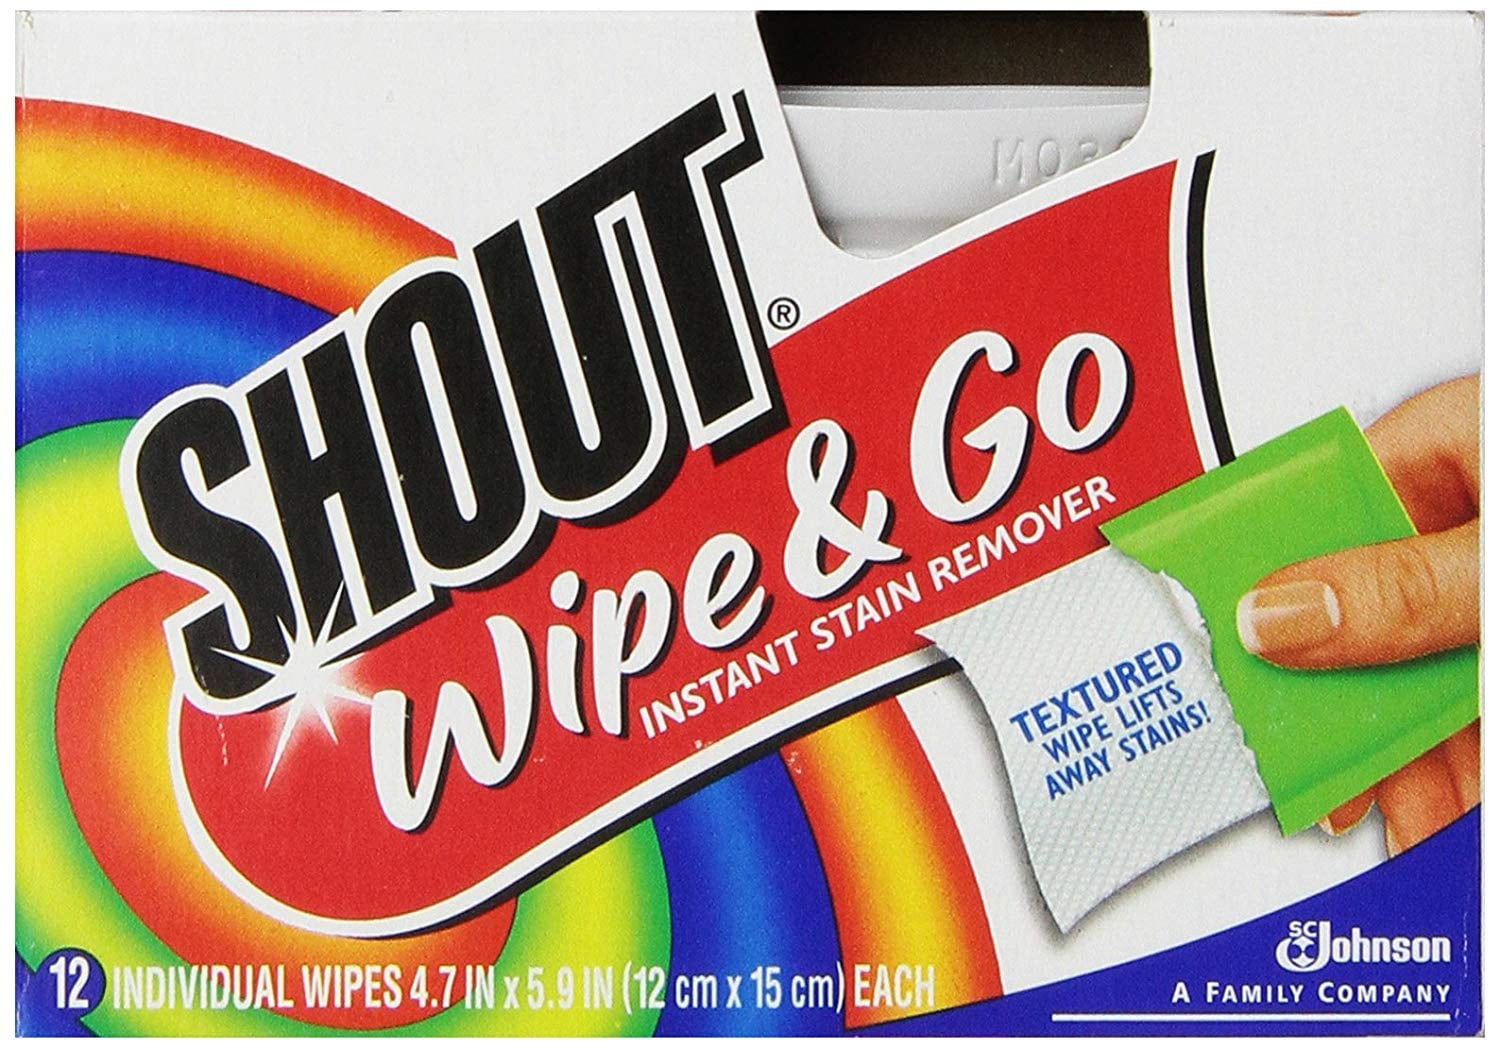 Details about   Shout Wipe & Go Instant Stain Remover 4.7 x 5.9 Includes one box of 80 